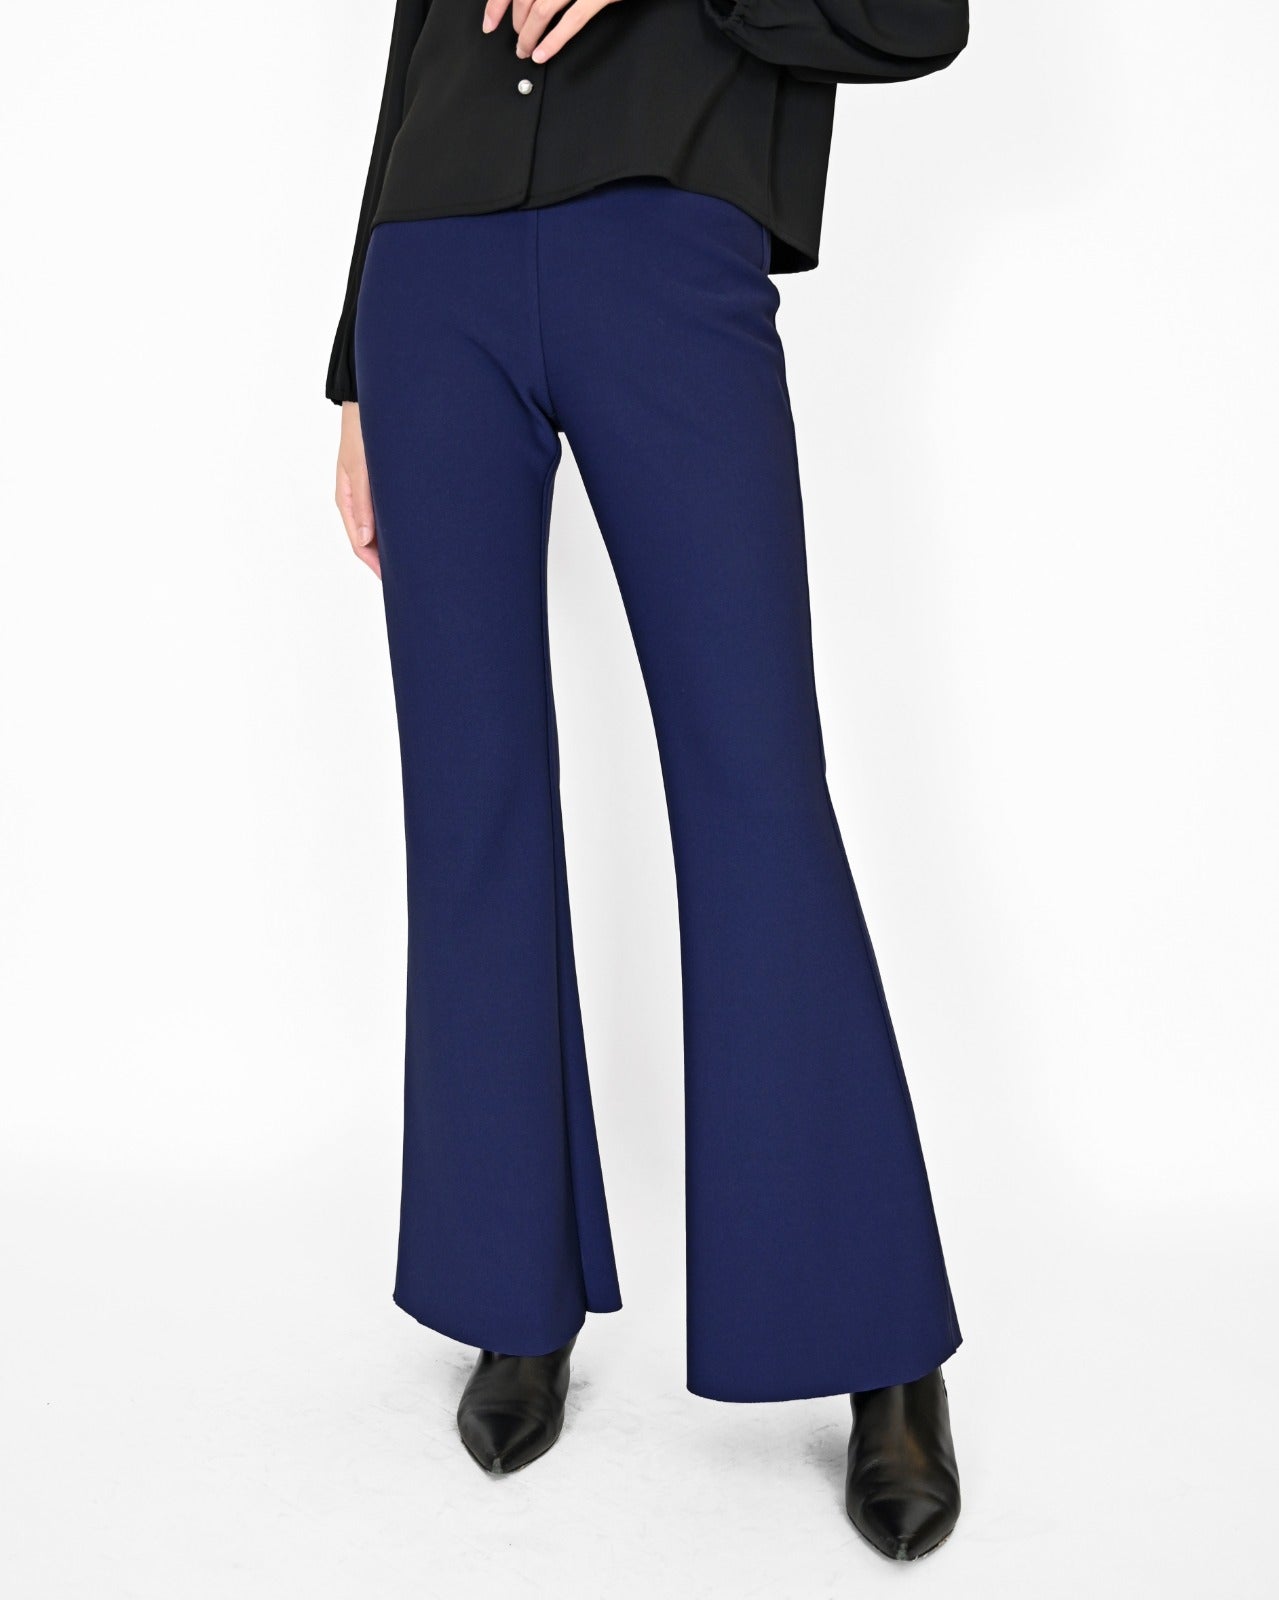 Load image into Gallery viewer, aalis LILI double knit flare pants (Navy)
